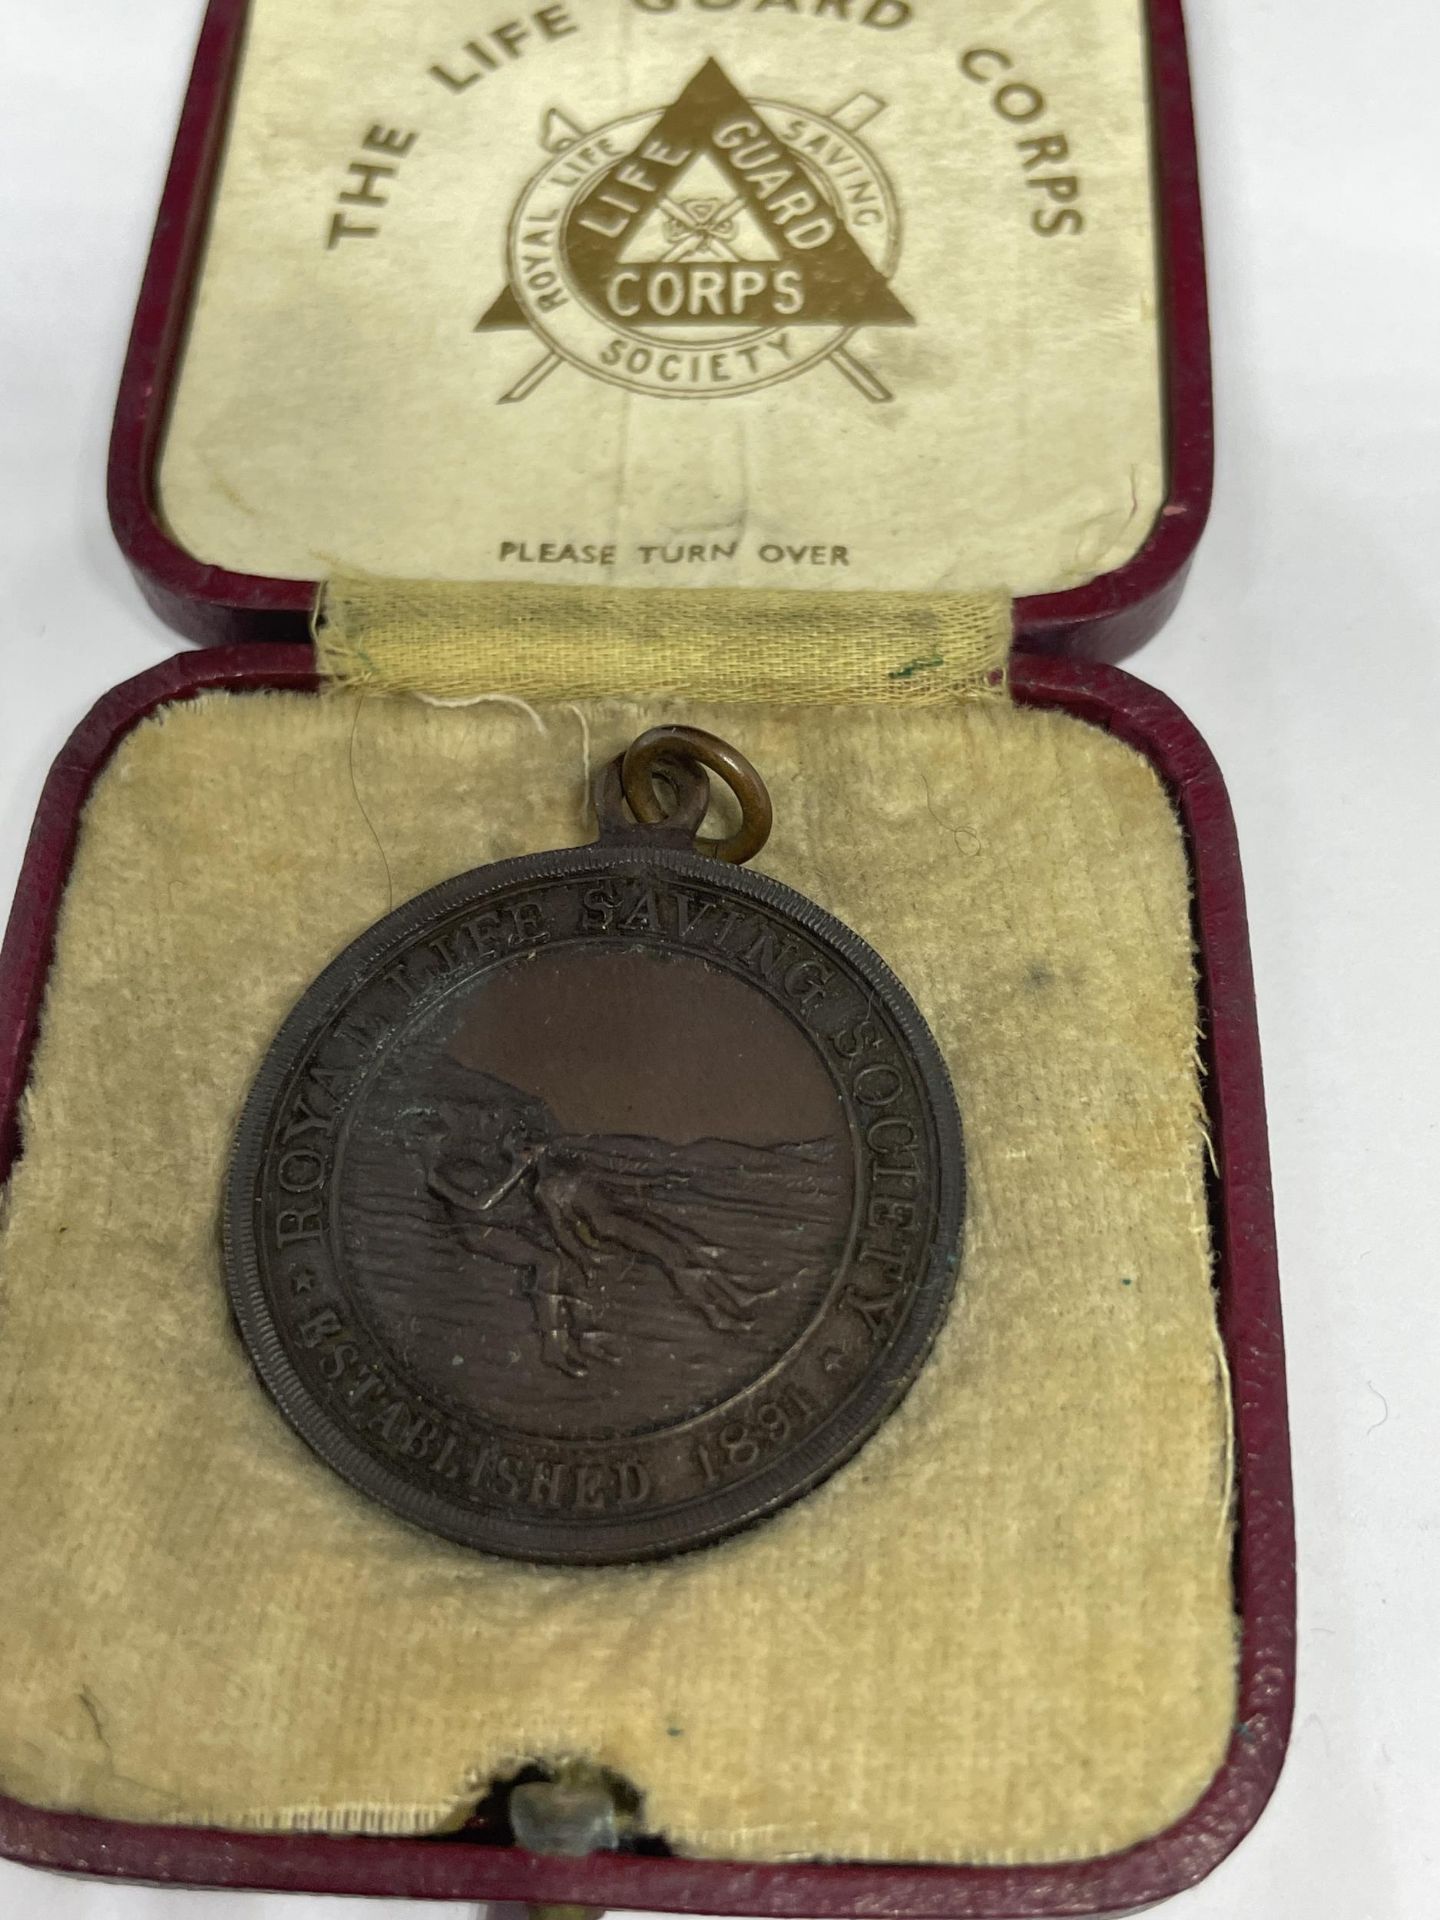 TWO VINTAGE MEDALS ONE LIFE GUARD CORPS 1936 AND HANLEY HIGH SCHOOL SACK RACE 1936 - Image 2 of 4